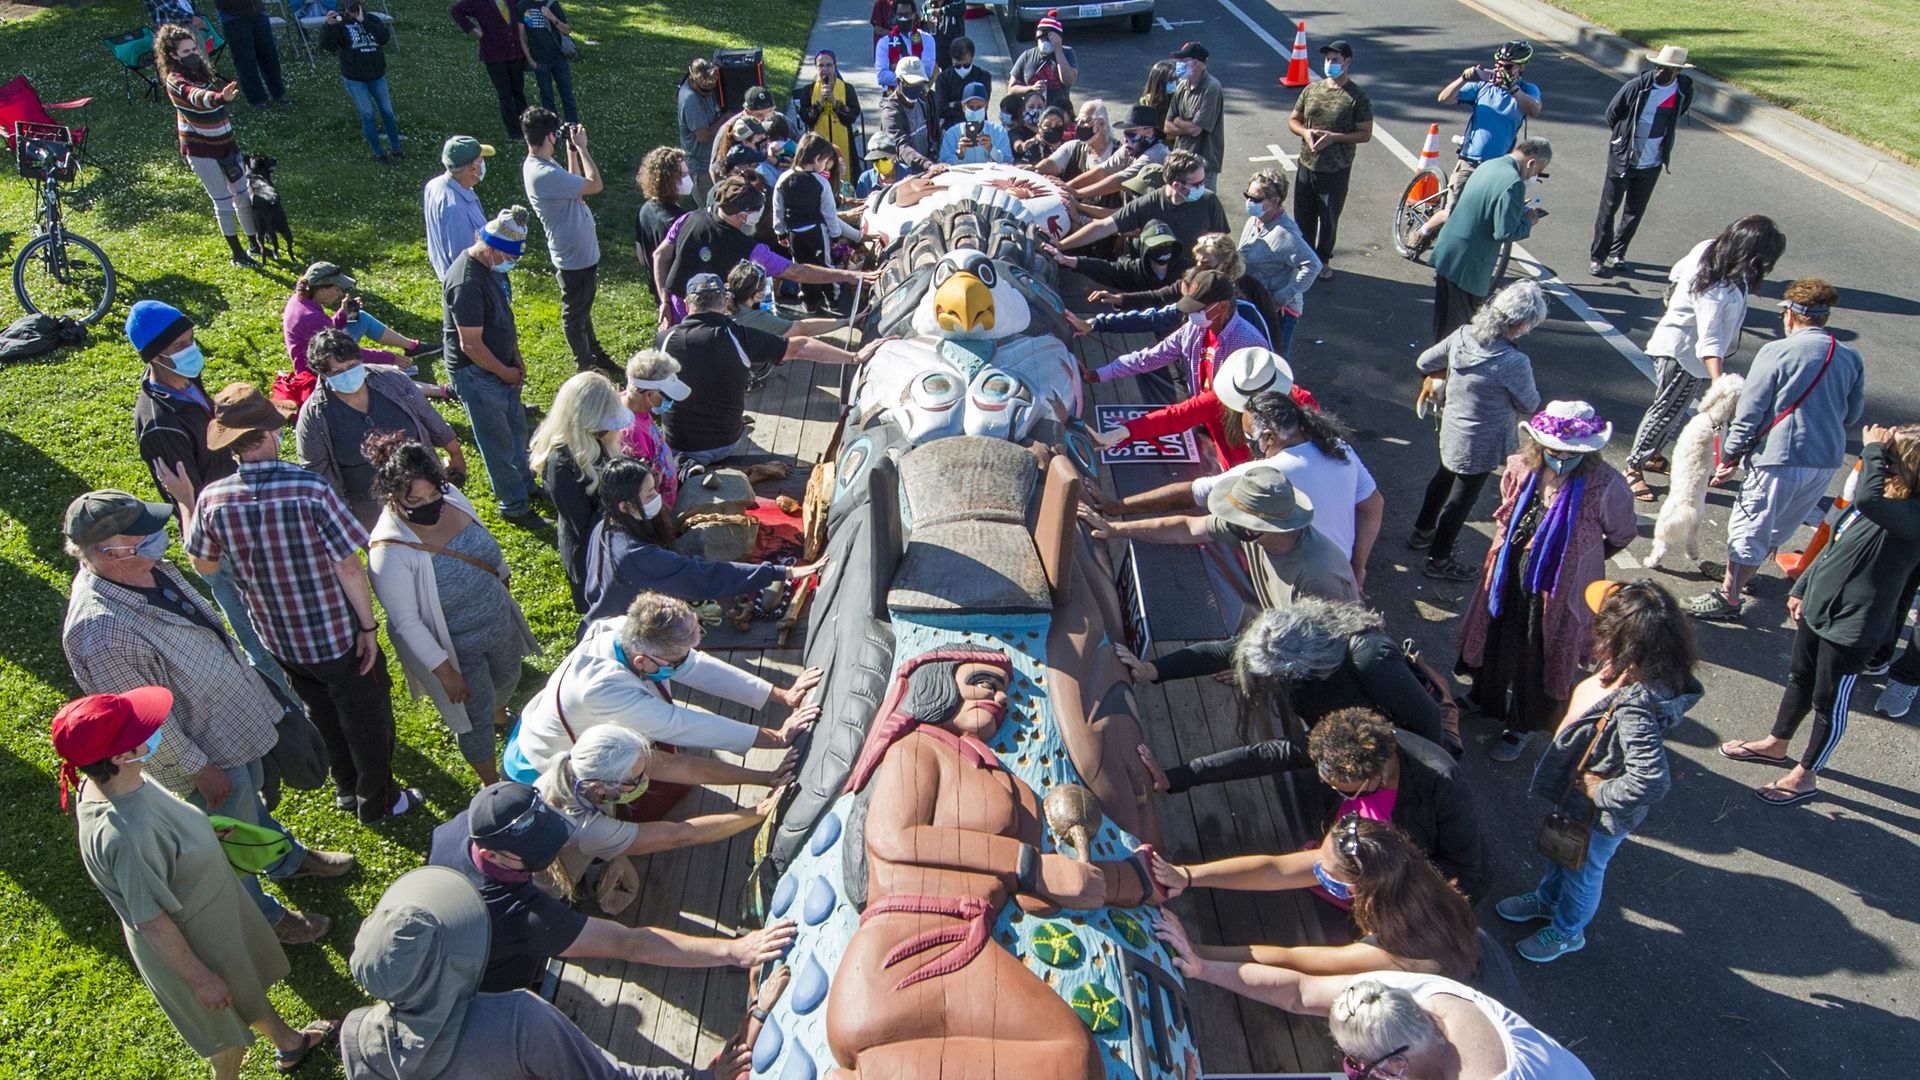 People blessing the totem pole in San Leandro, California, on June 3.